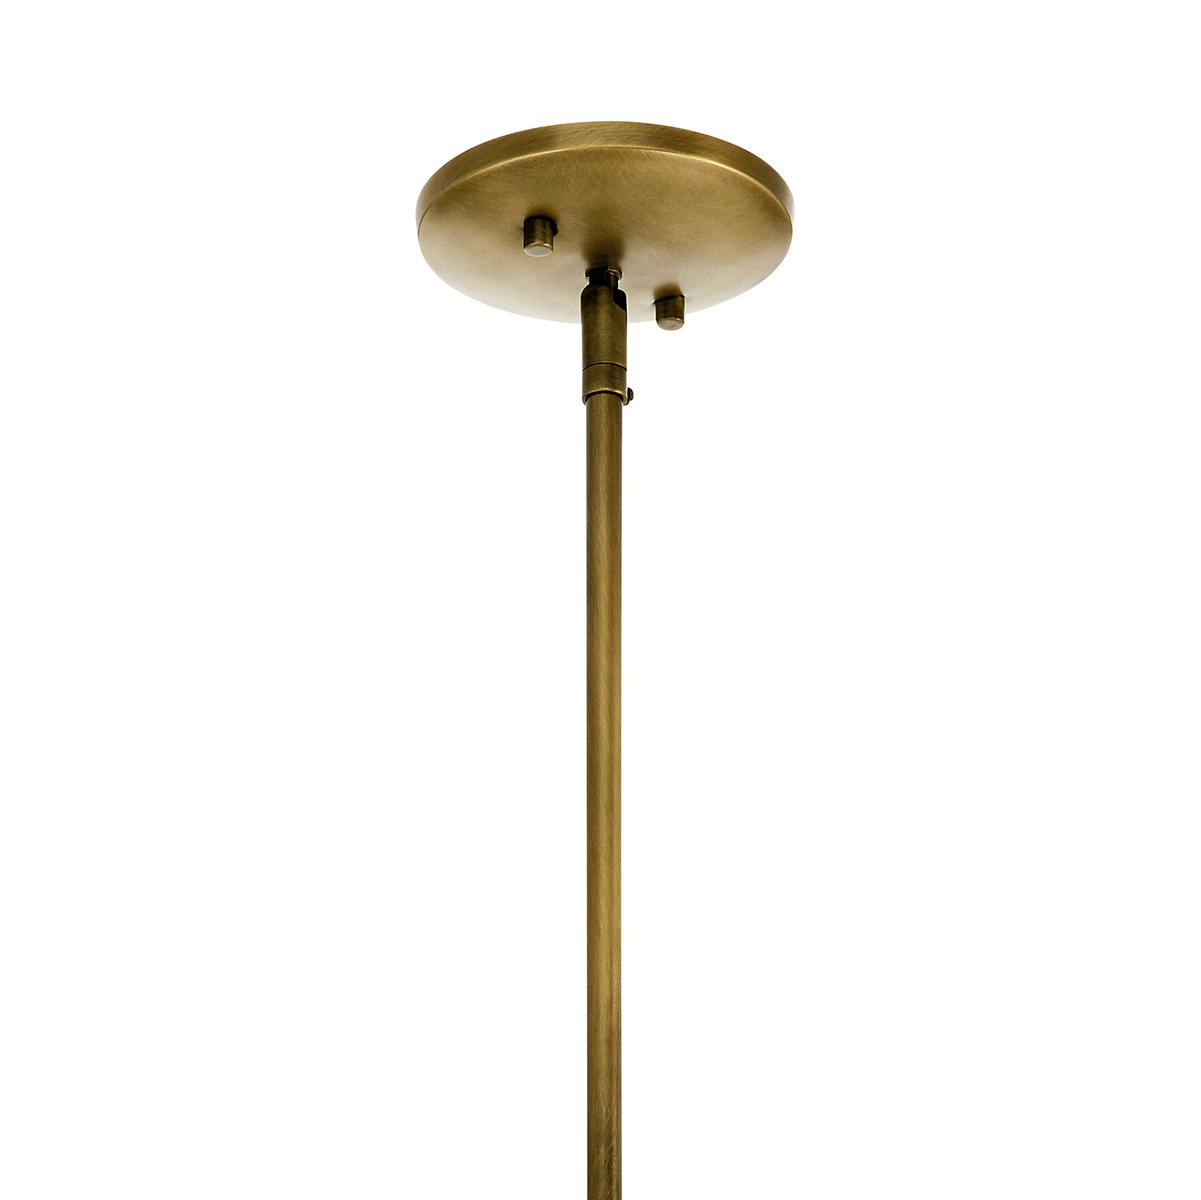 Canopy for the Thisbe 29.25" 4 Light Foyer Pendant Brass on a white background